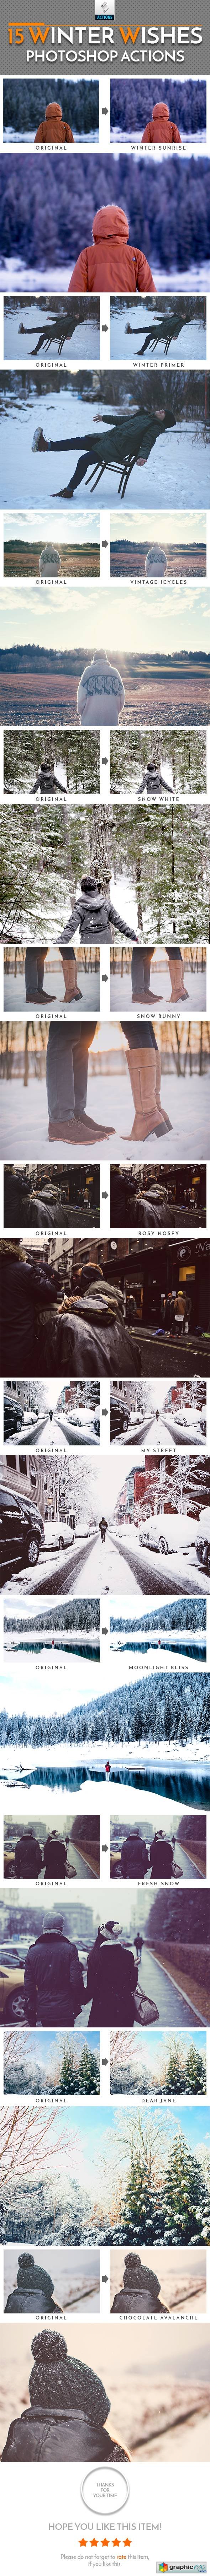 15 Winter Wishes Photoshop Actions